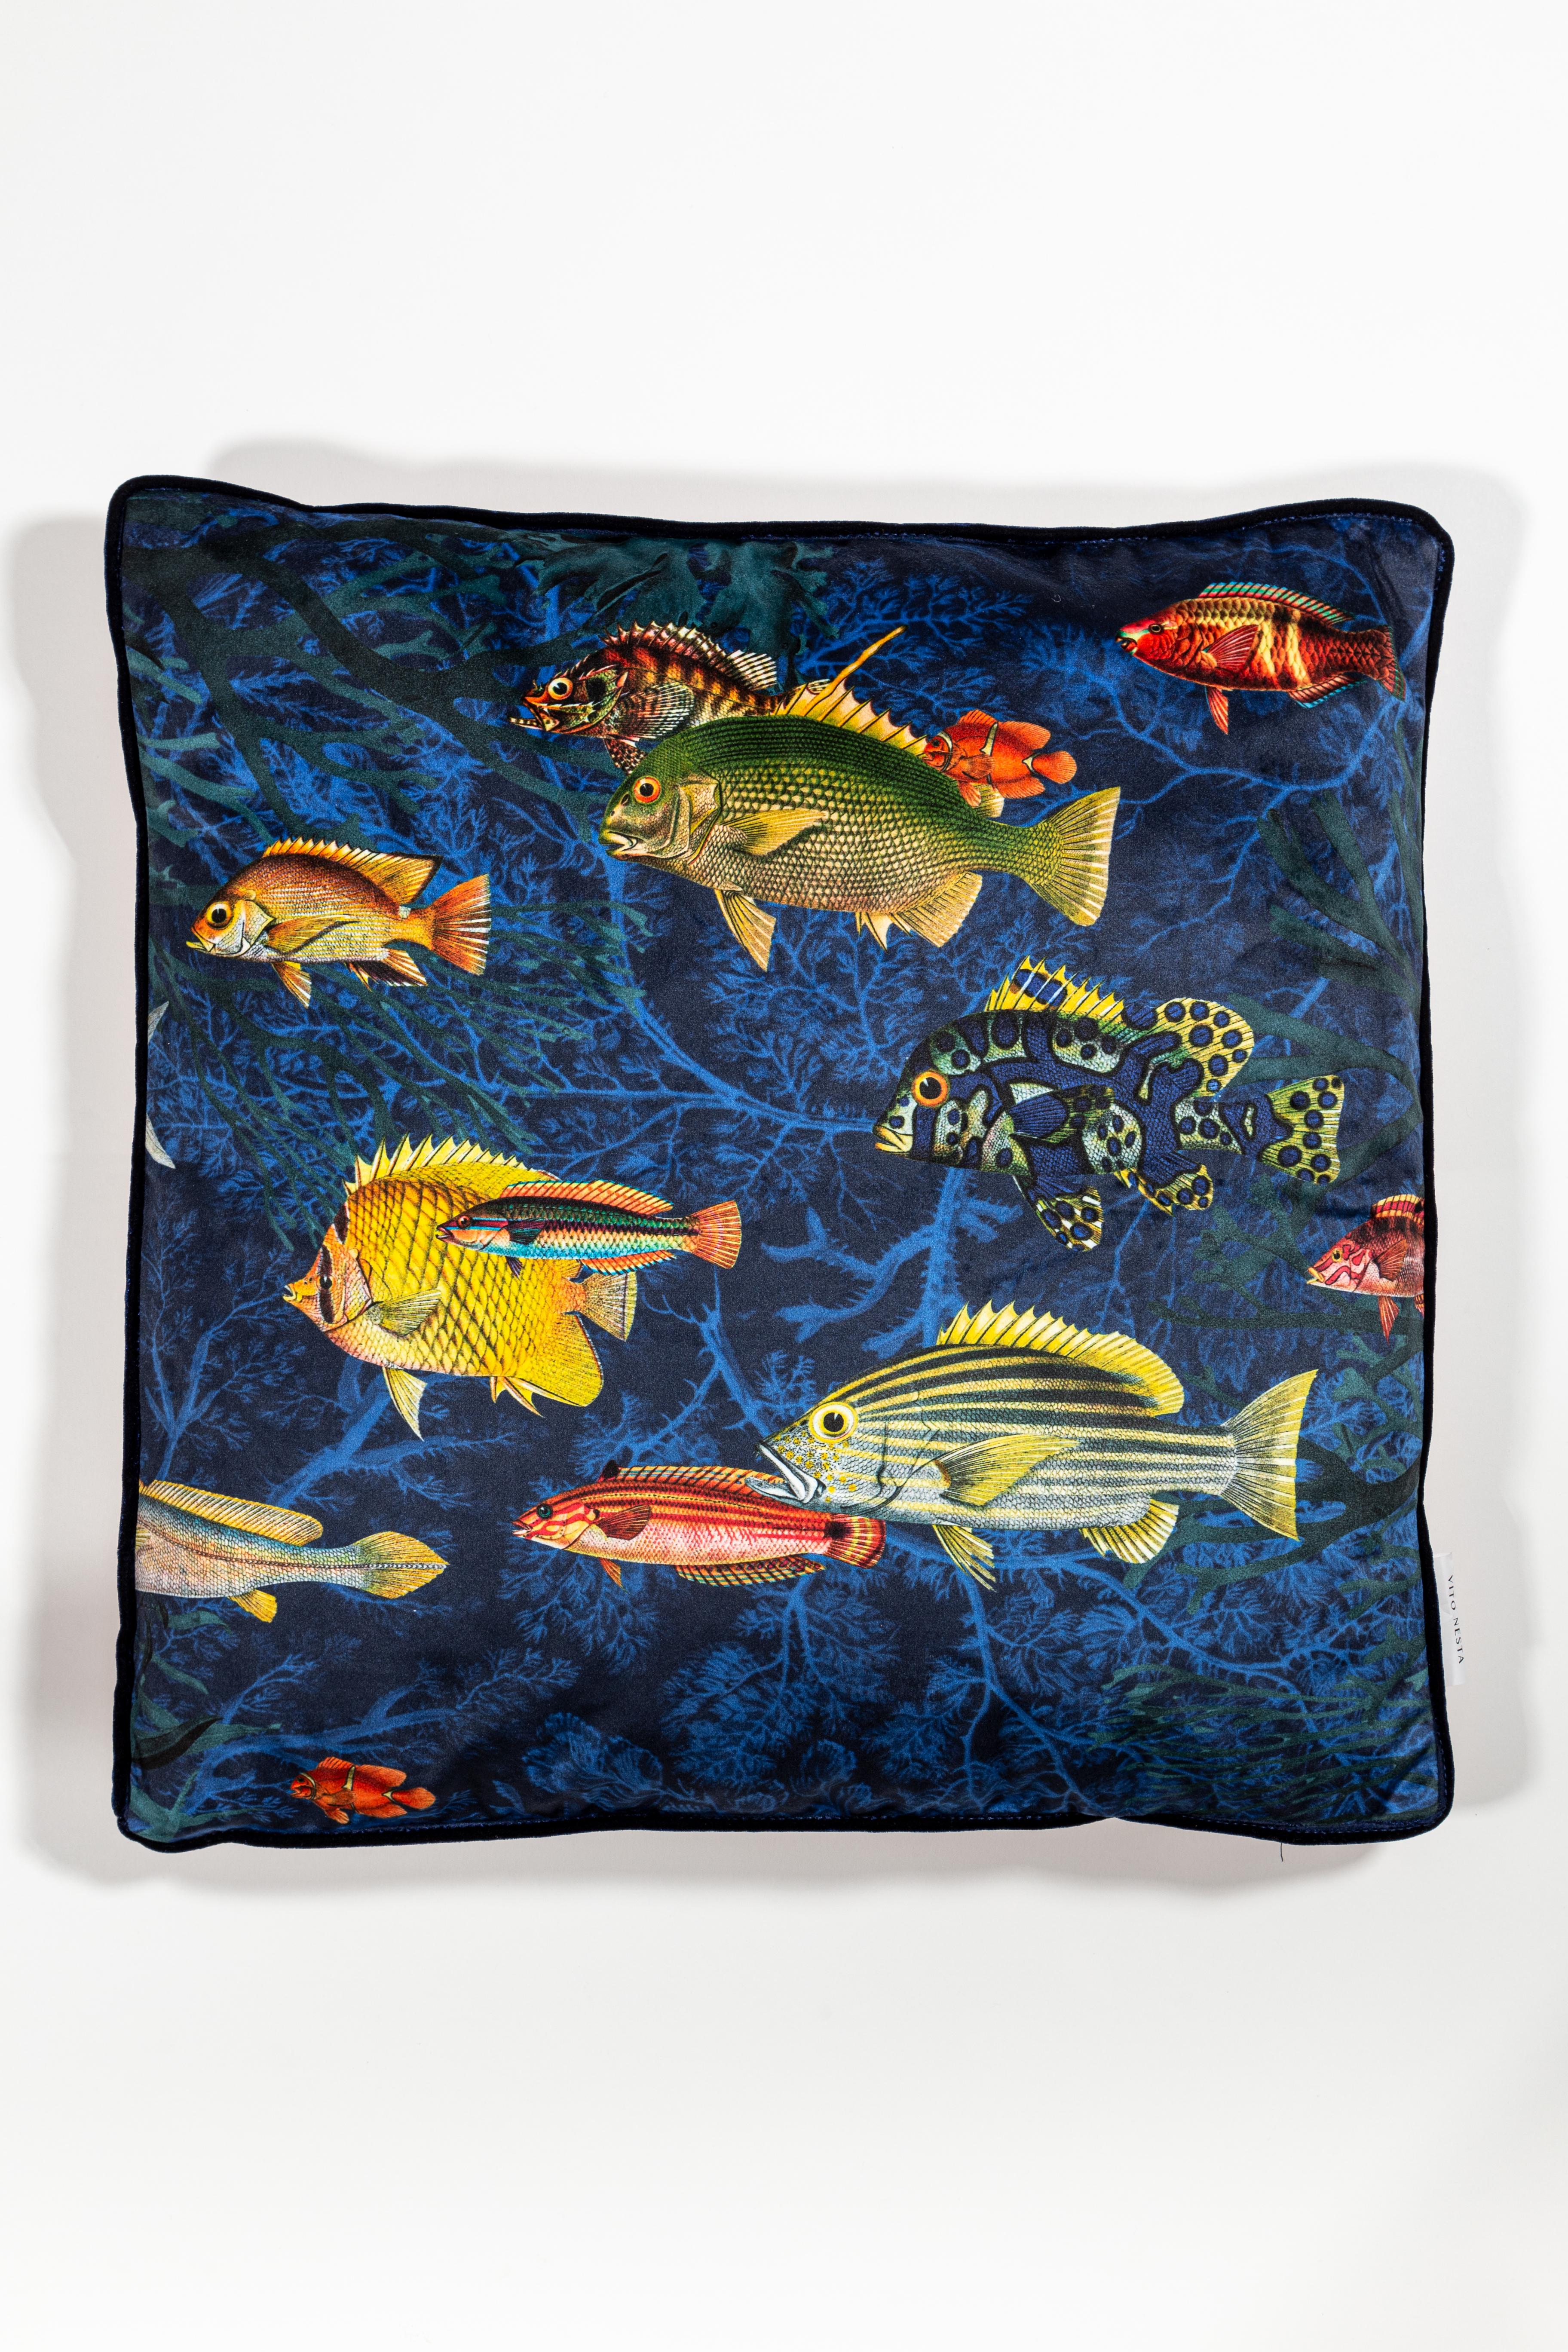 Amami, Contemporary Velvet Printed Pillow by Vito Nesta For Sale 3